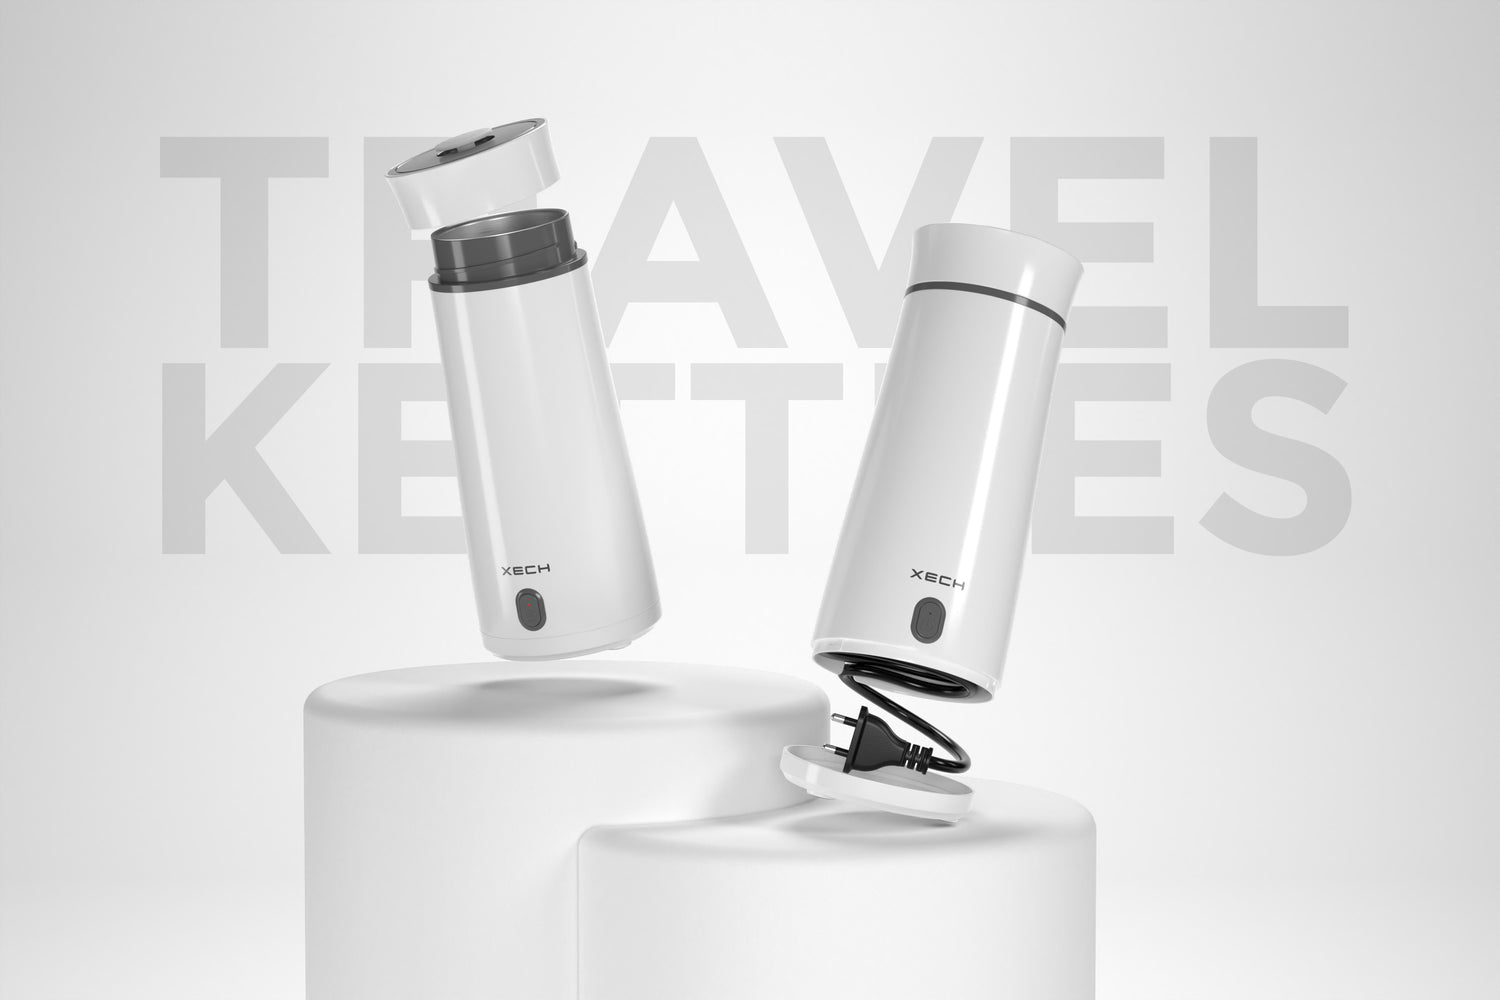 XECH Electric Travel Kettle Hydroboil is an electric water bottle that can boil water